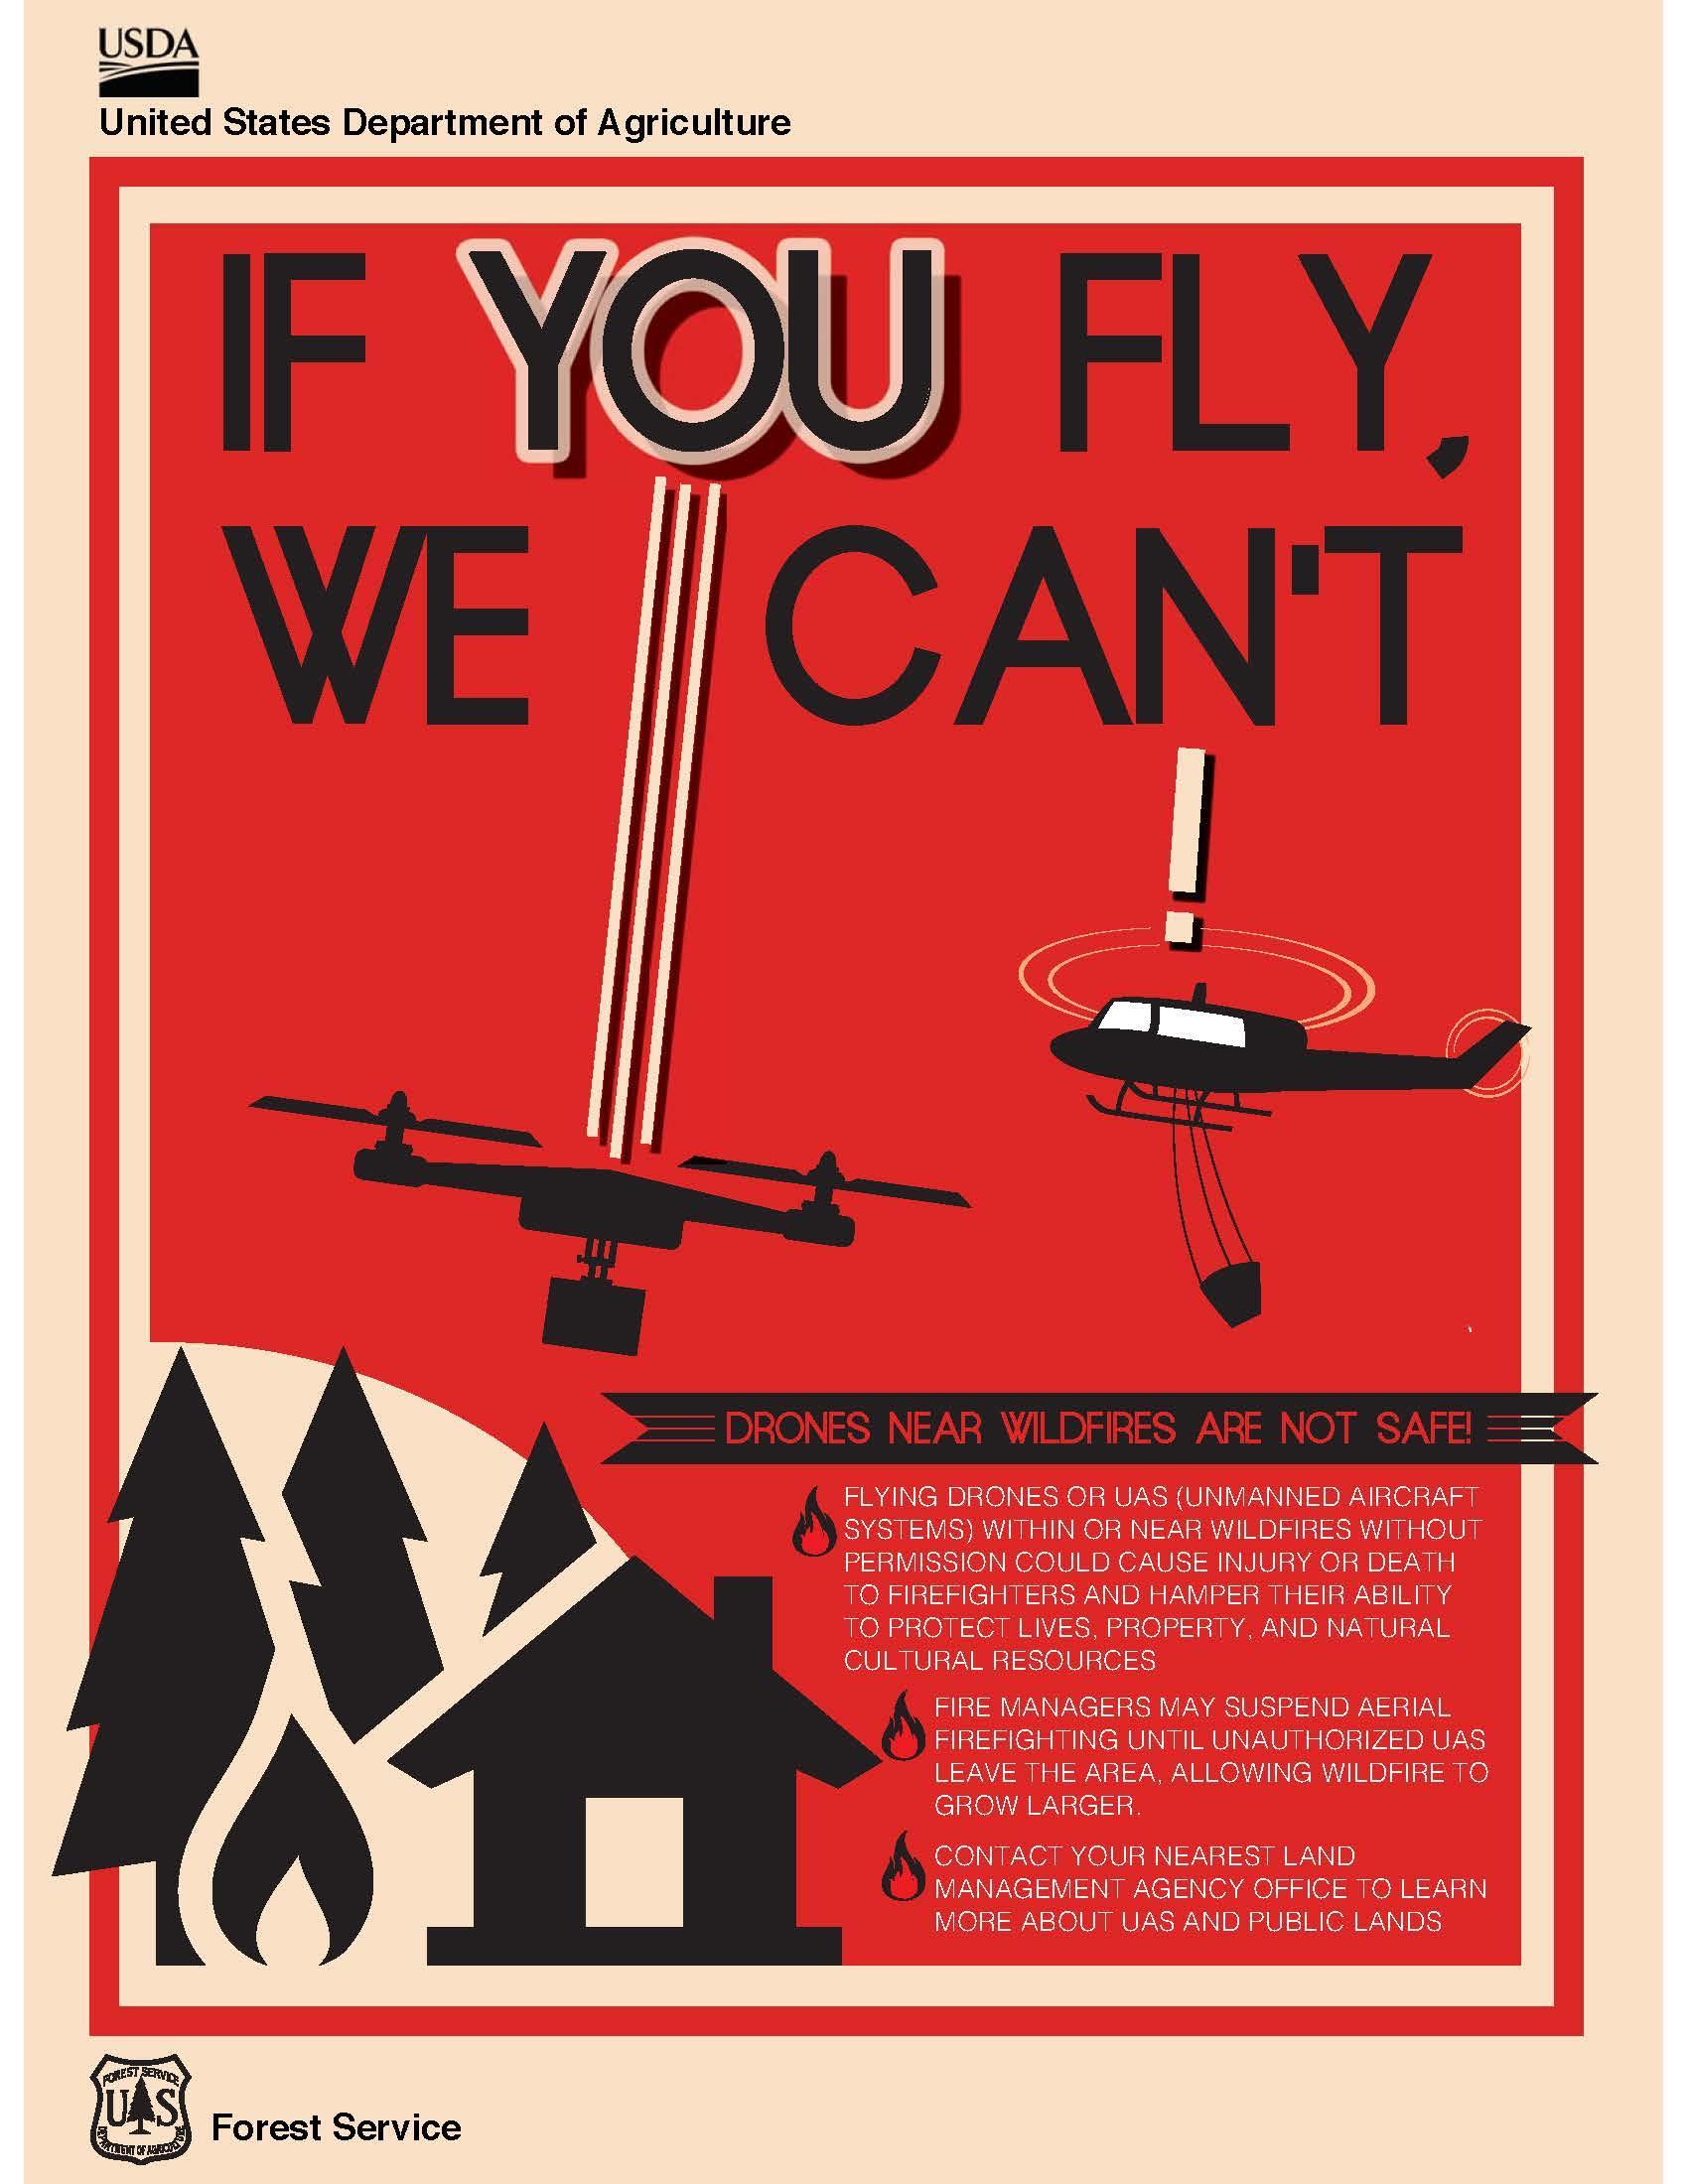 poster shows the hazard of flying drones while fire aircraft are flying missions